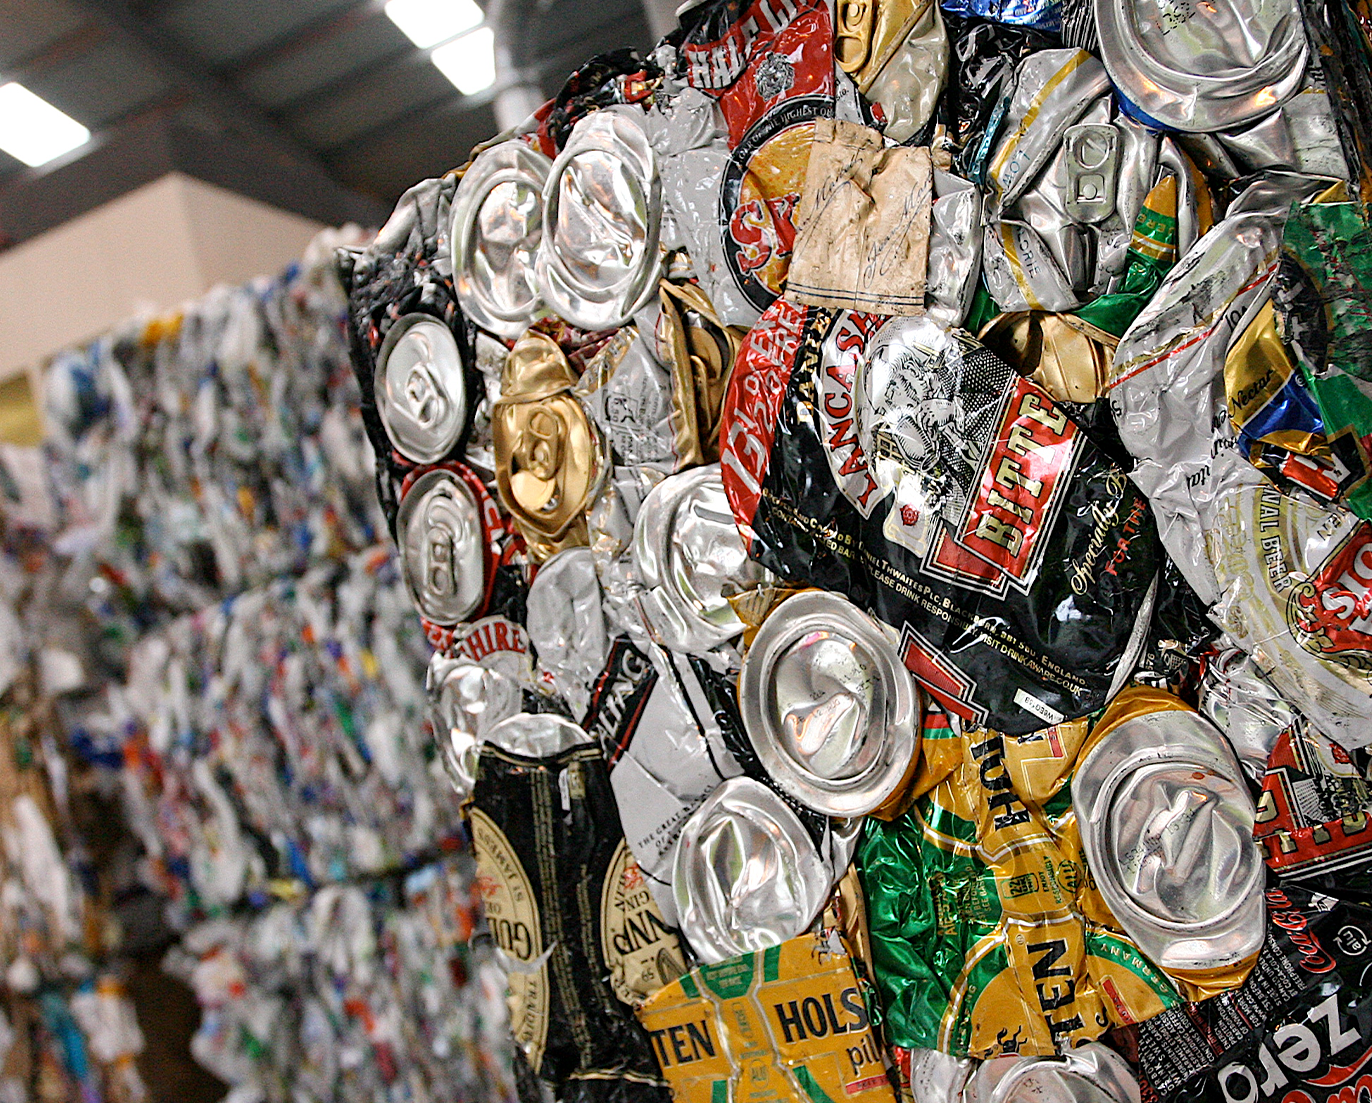 Stacks of crushed cans in a recycling facility